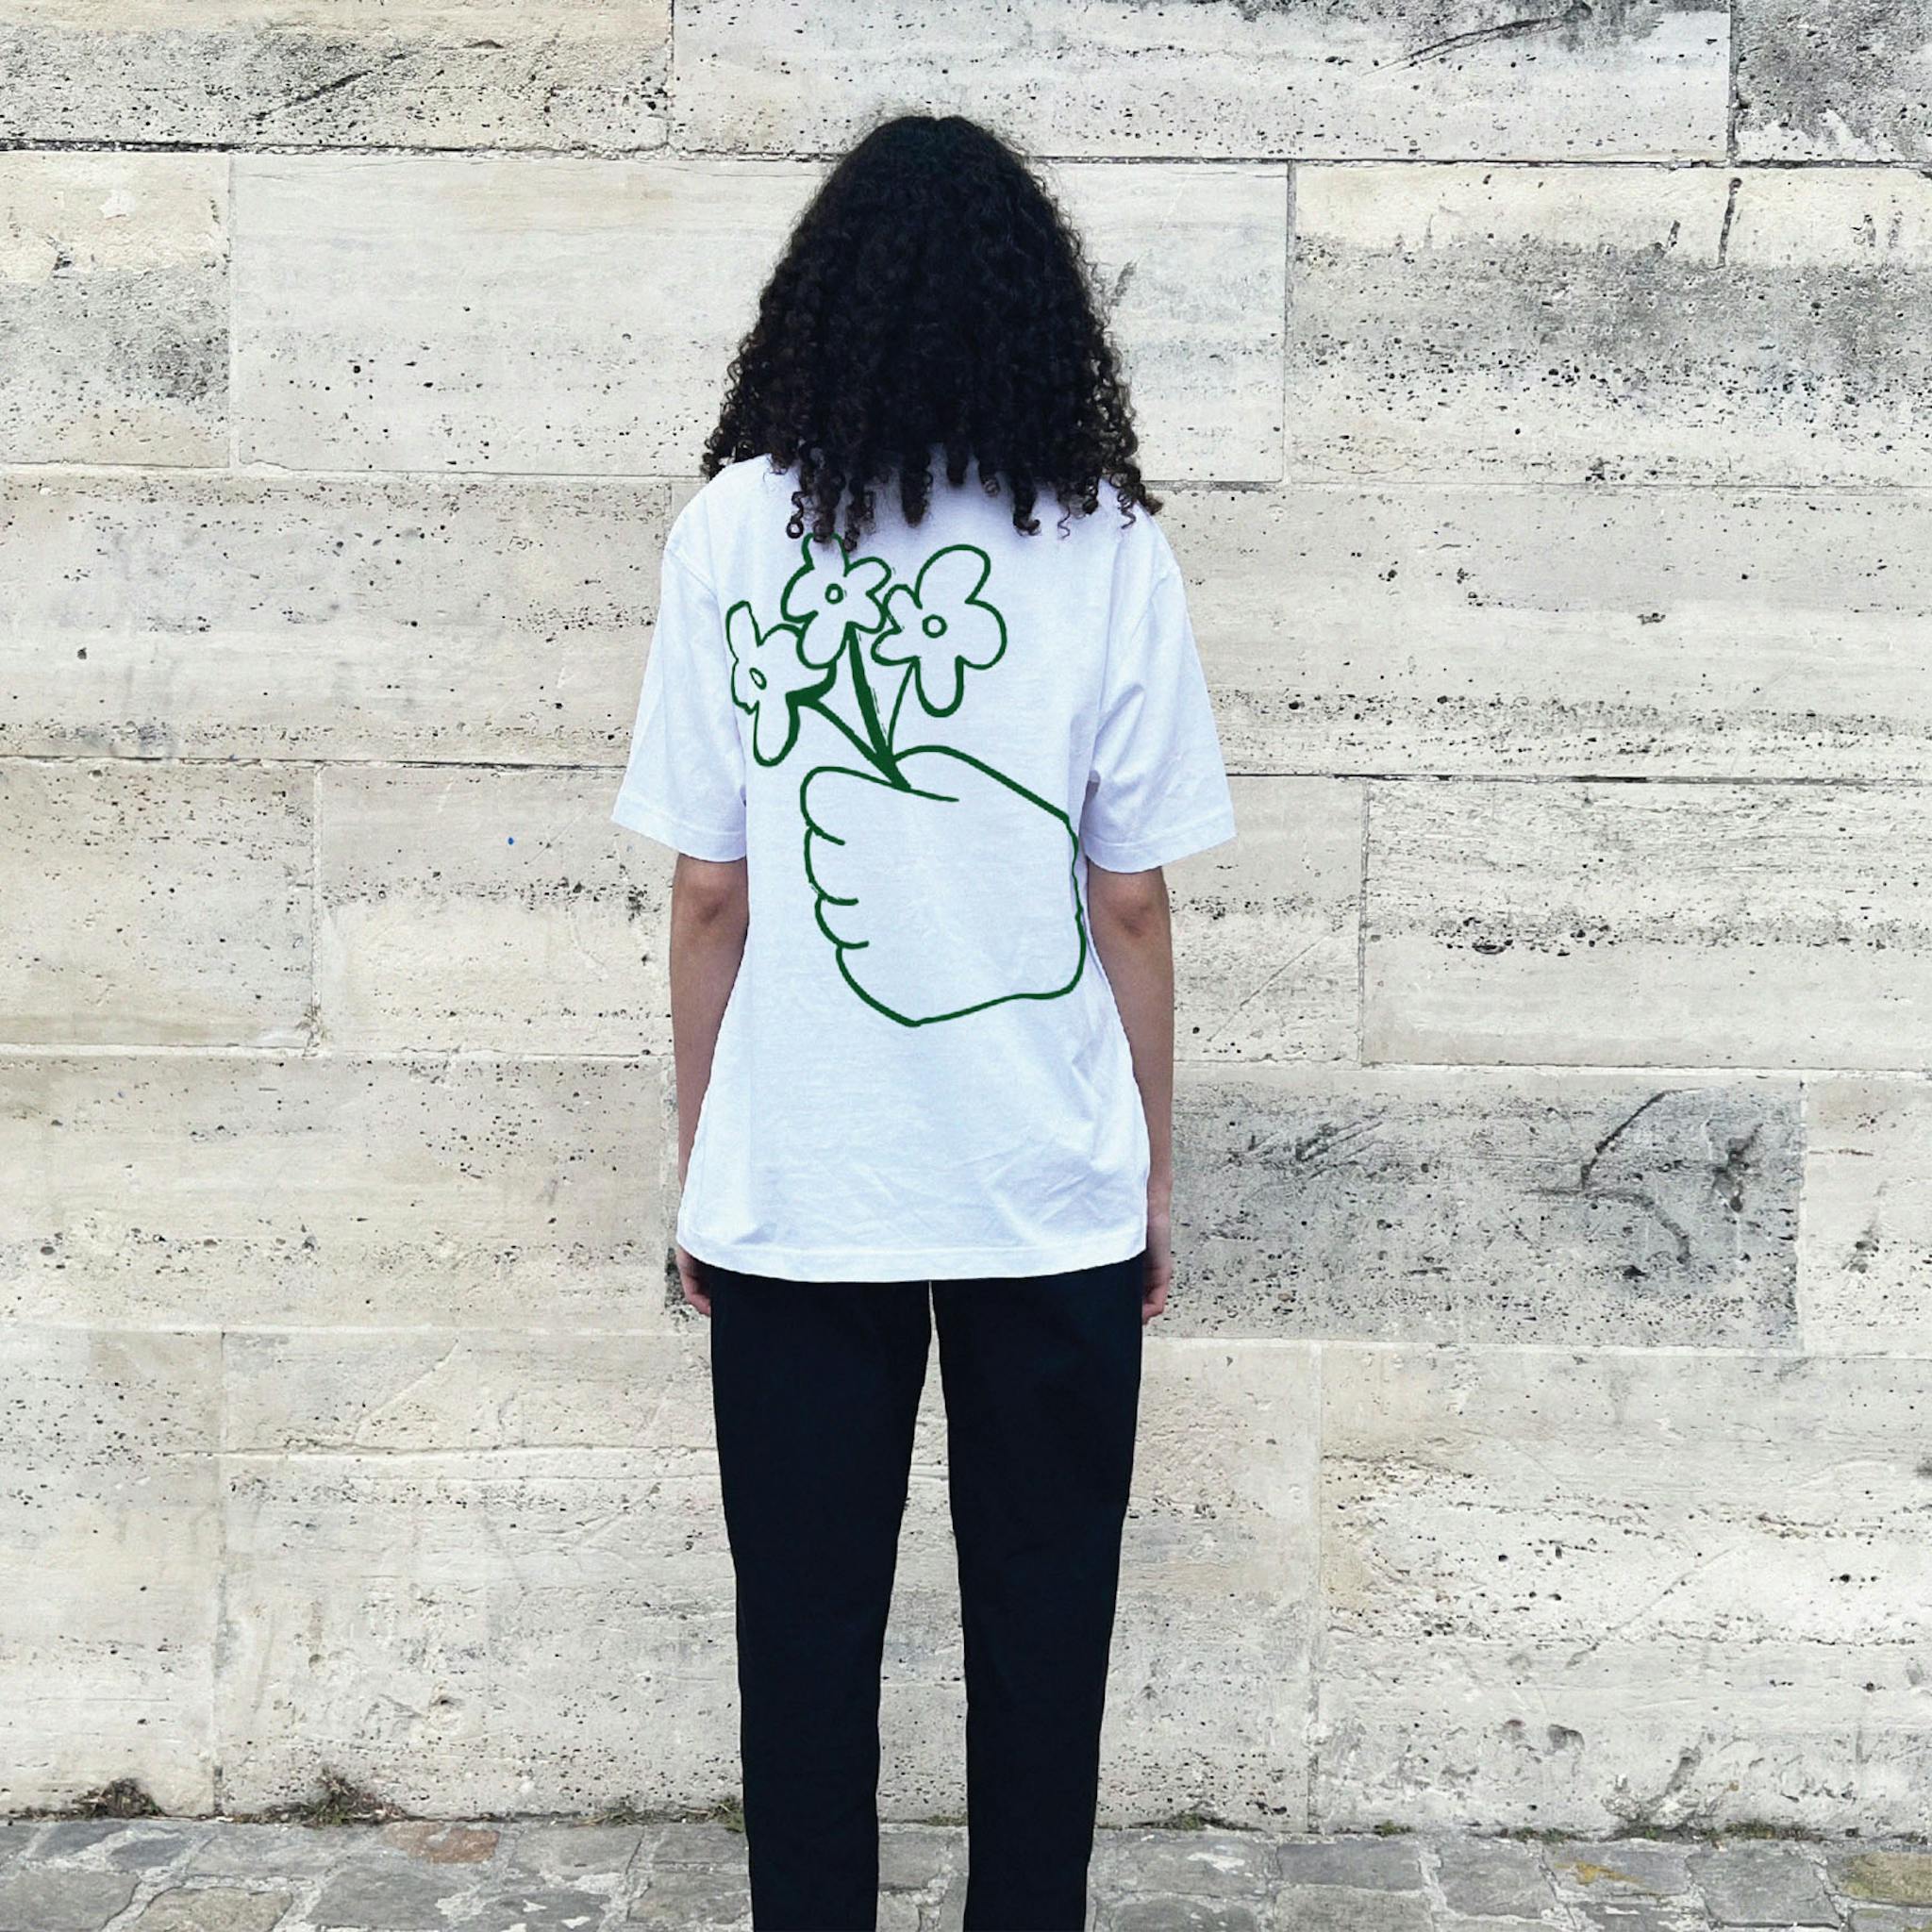 A woman with long dark hair wearing a white T-shirt with a green outline drawing of a hand holding three flowers on the back.